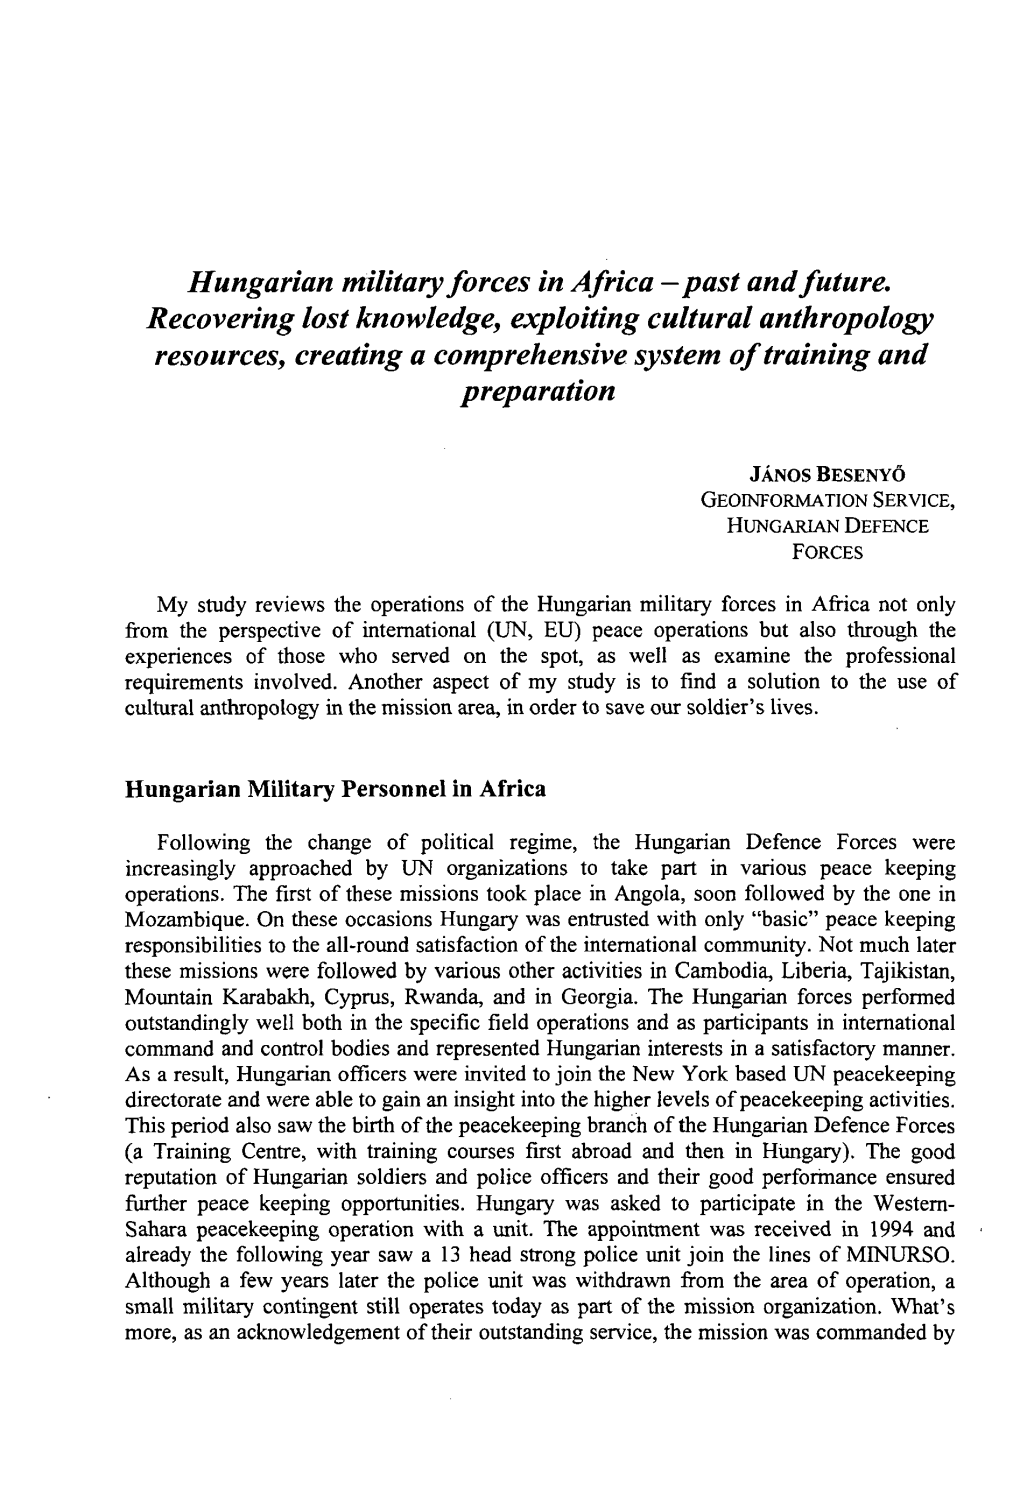 Hungarian Military Forces in Africa —Past and Future. Recovering Lost